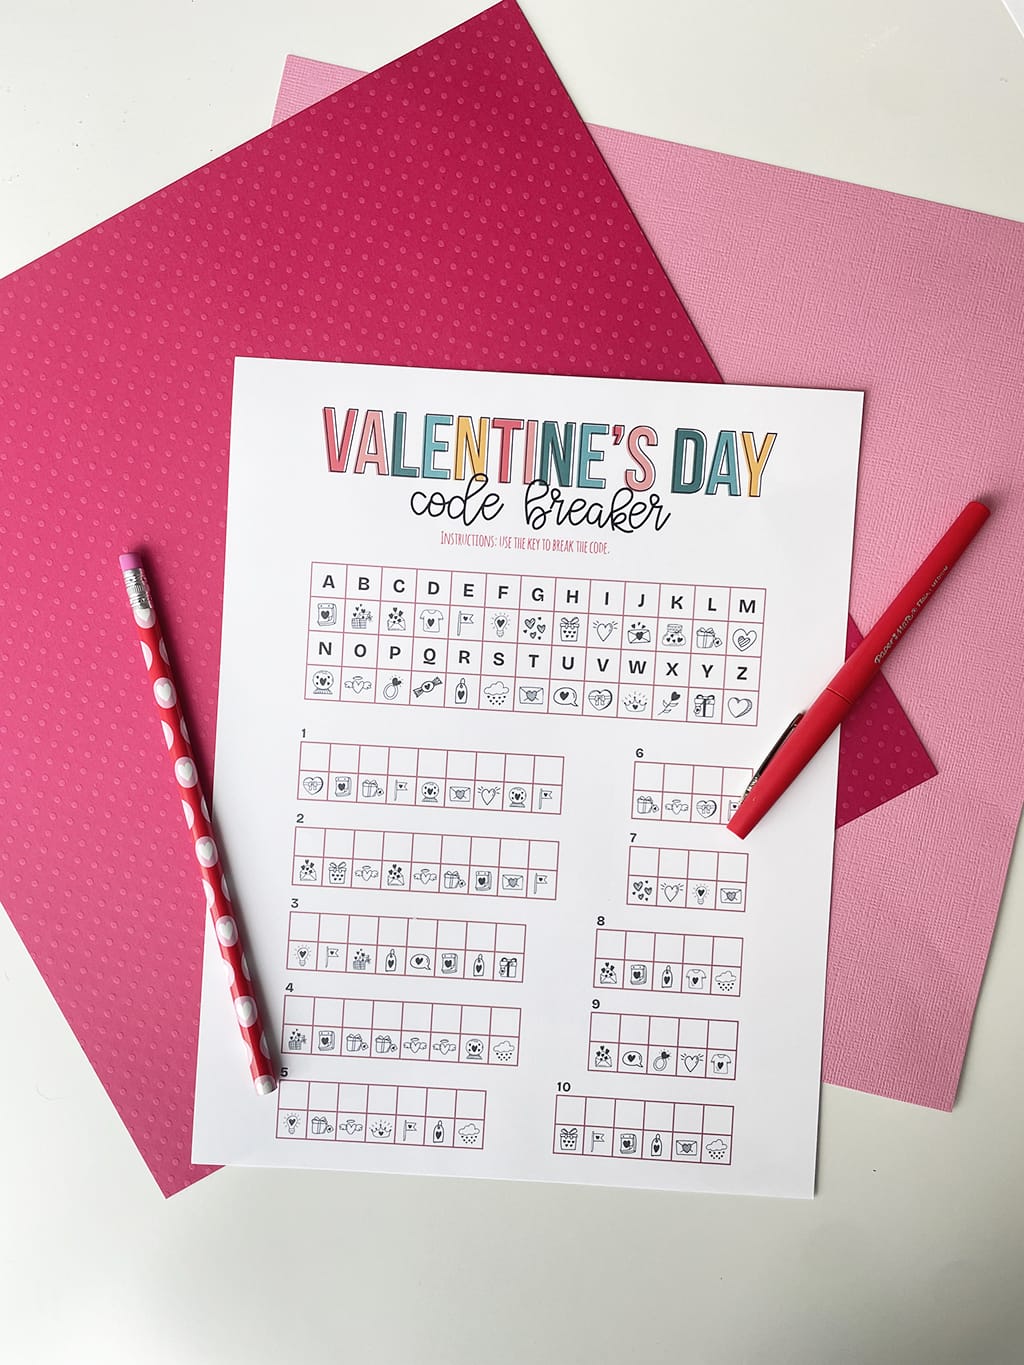 Valentines Day Code Breakers Printable Game printed out and placed on a dark pink and light pink paper backdrop. With a red fineline marker and pencil.